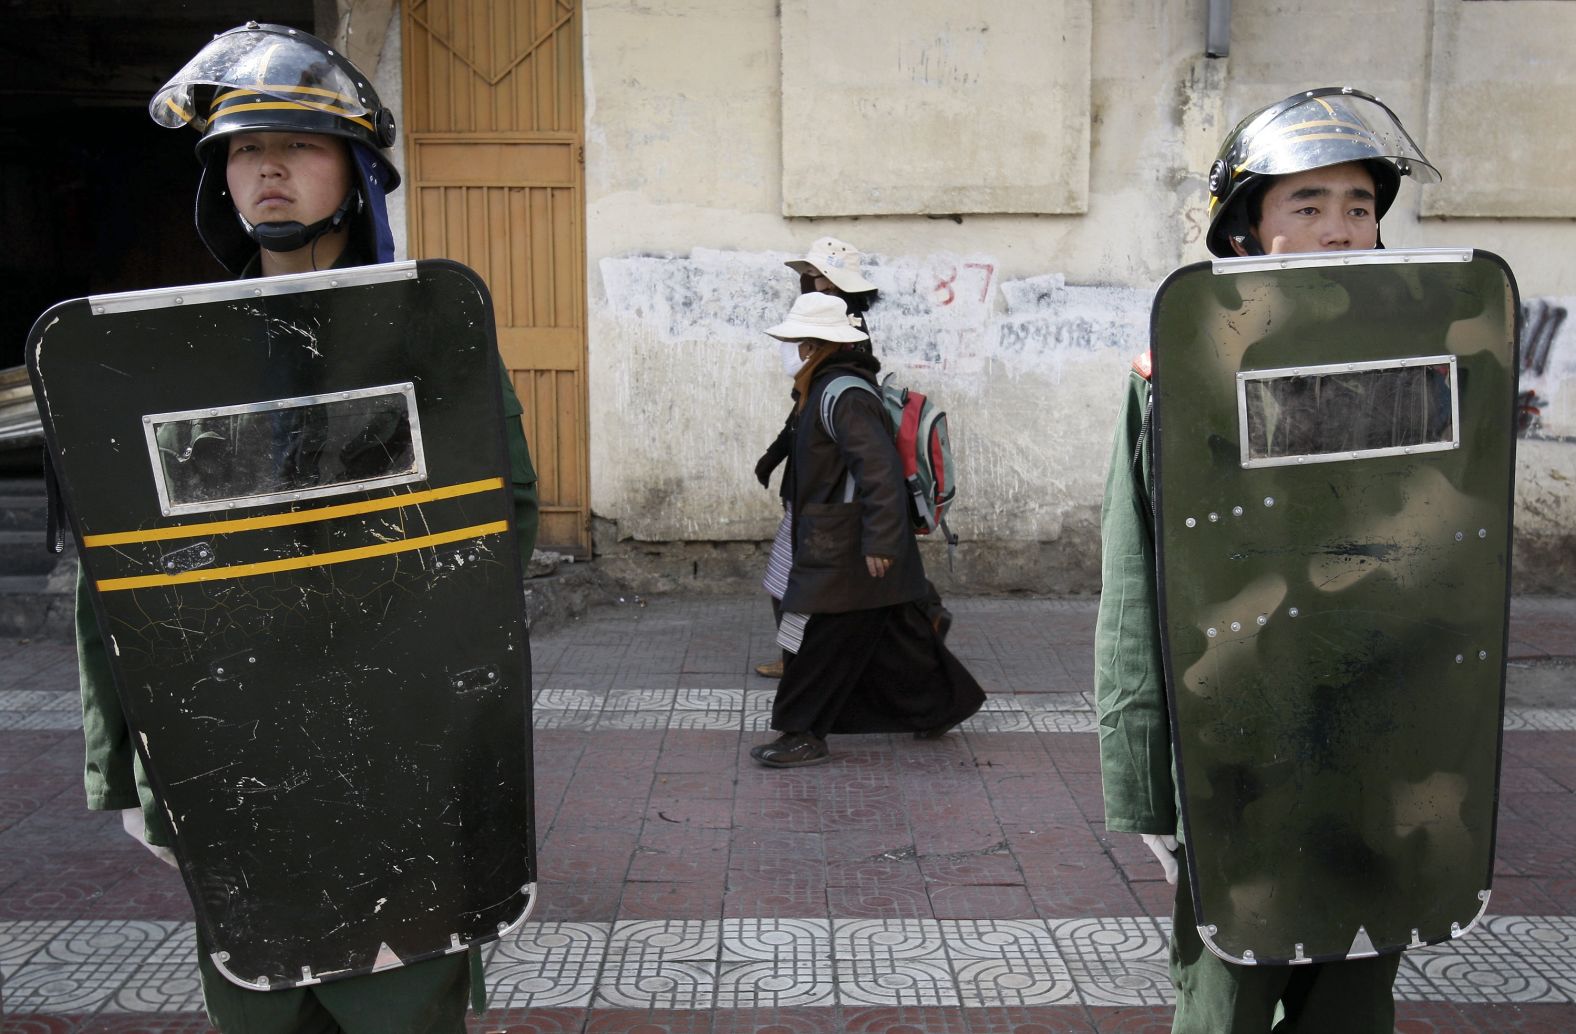 Women walk past Chinese paramilitary police in Lhasa, the capital of China's autonomous region of Tibet, in March 2008. China was <a href="https://www.cnn.com/2008/WORLD/asiapcf/11/05/china.tibet/index.htm" target="_blank">cracking down on Tibet</a> following anti-government protests and riots there.